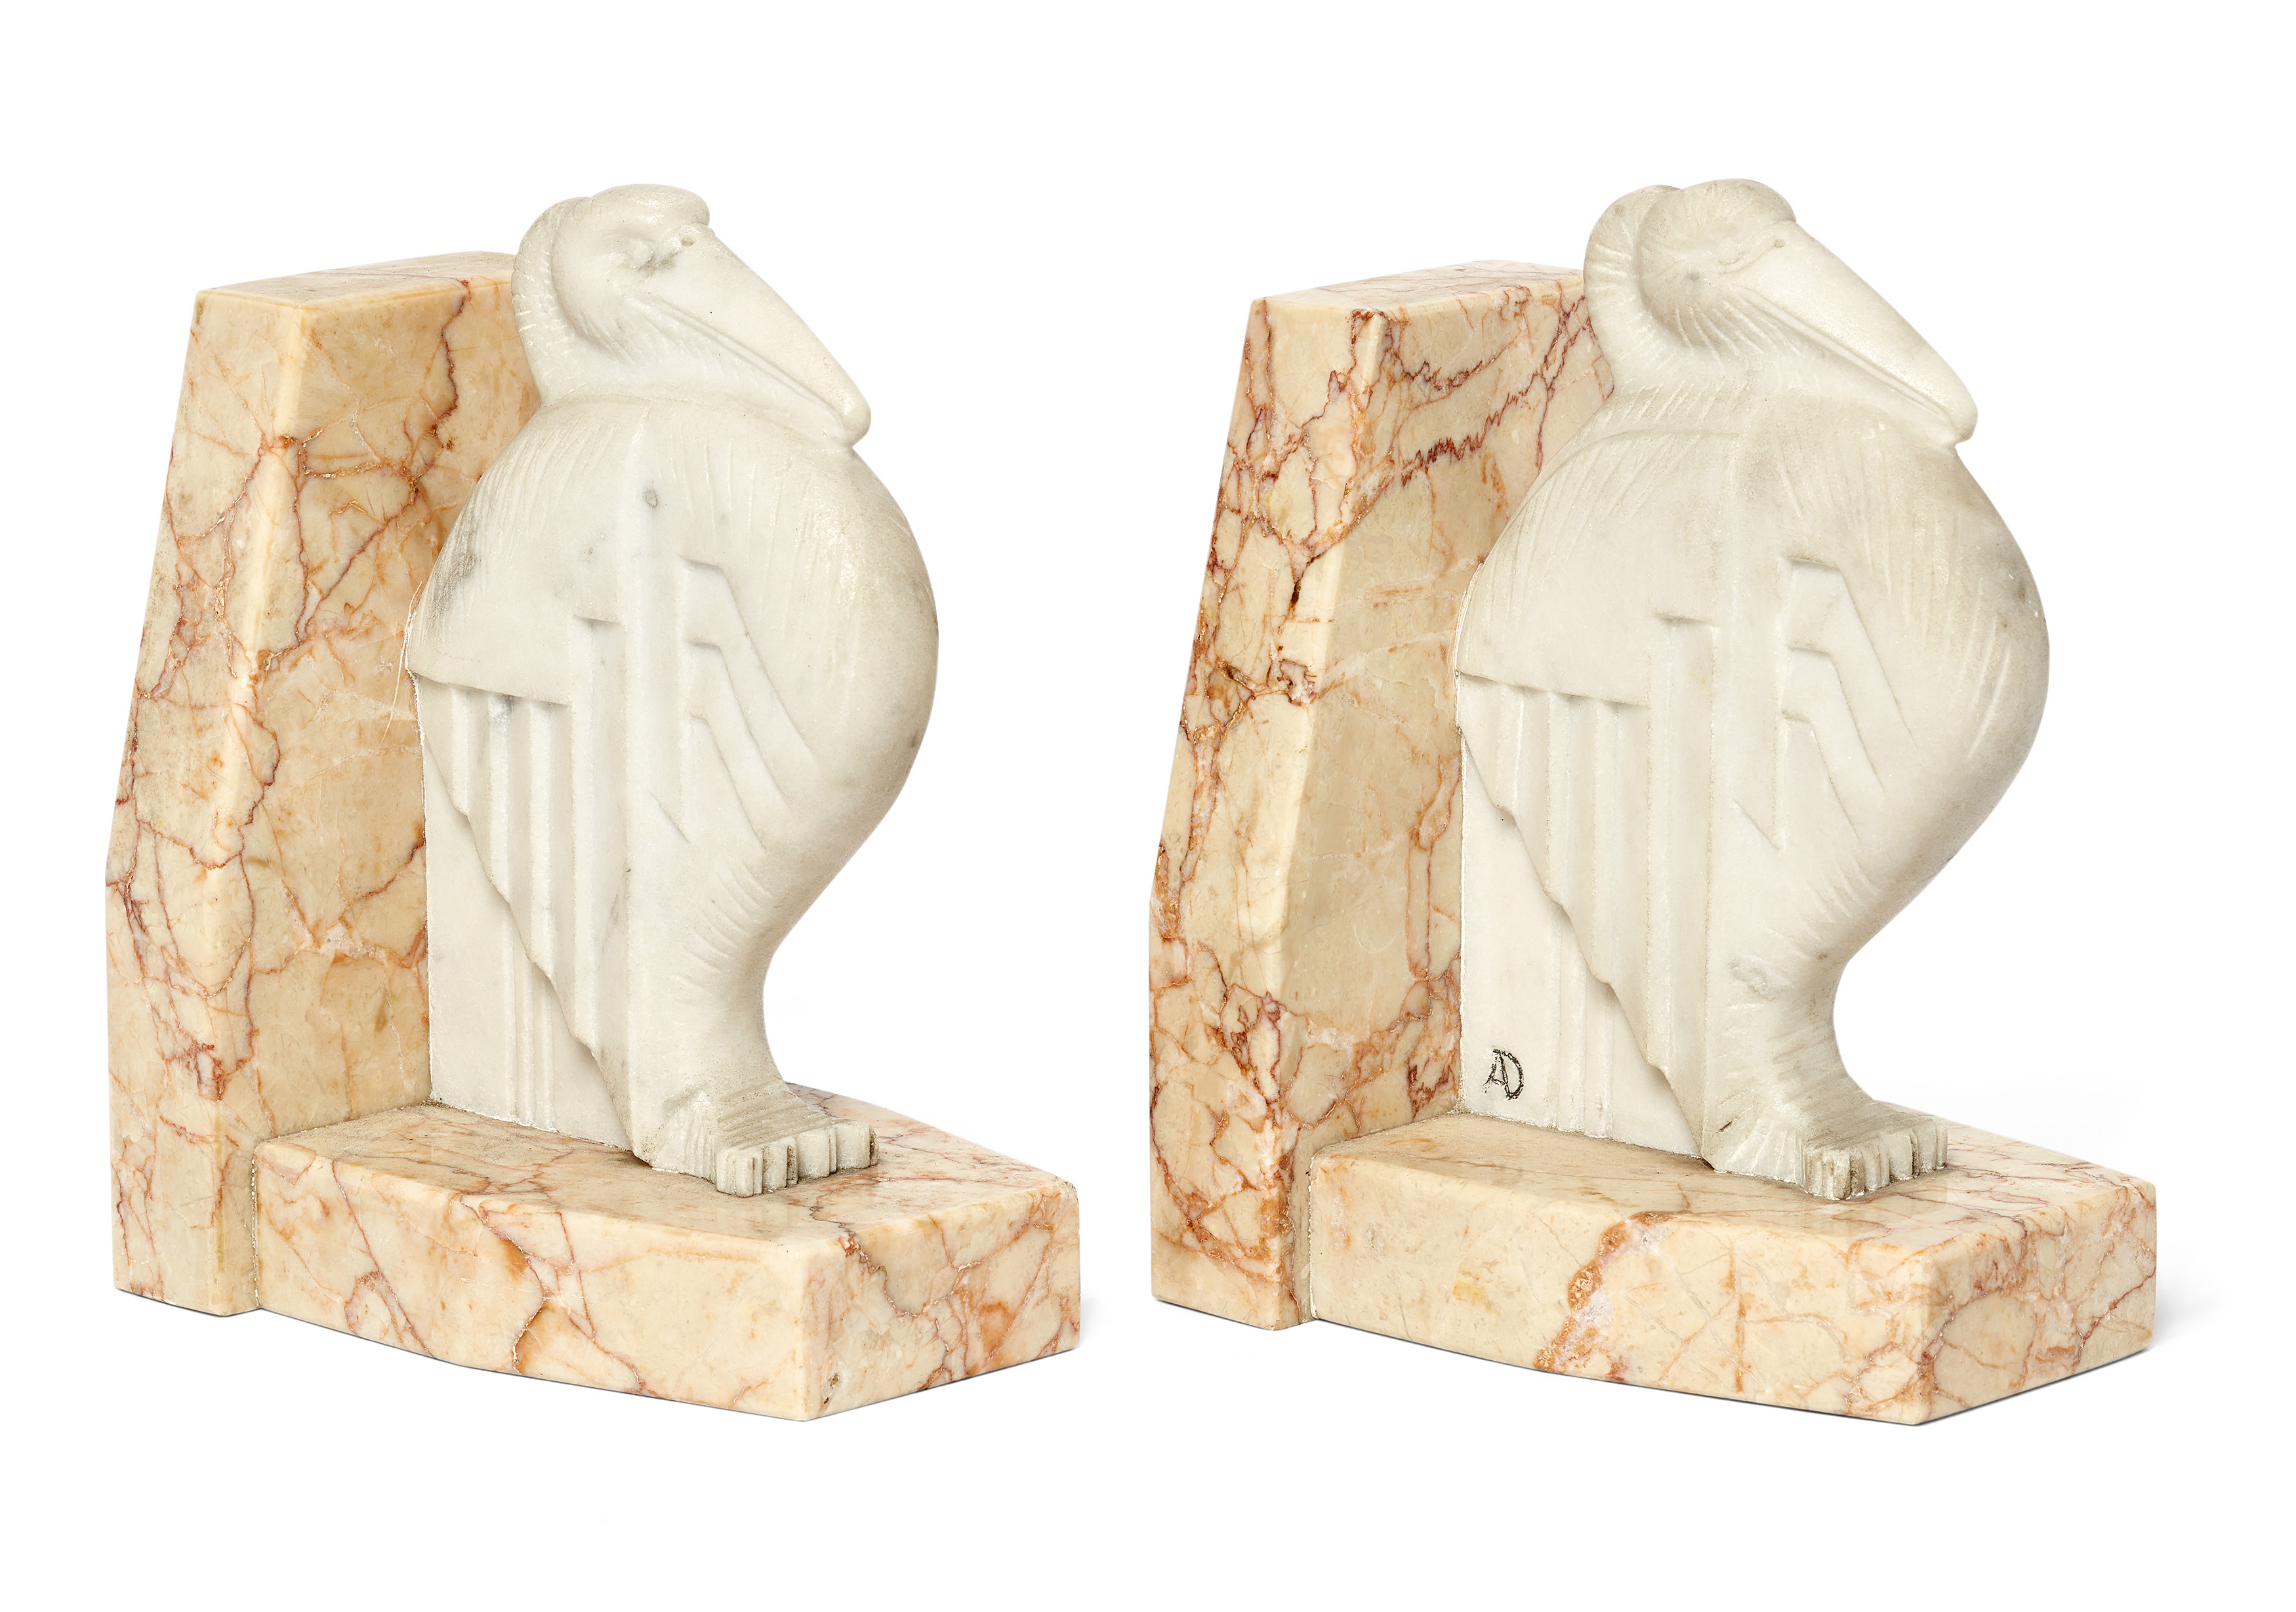 French Art Deco  Pair of pelican book ends, circa 1930  Carrara marble, variegated marble  One ... - Image 2 of 2